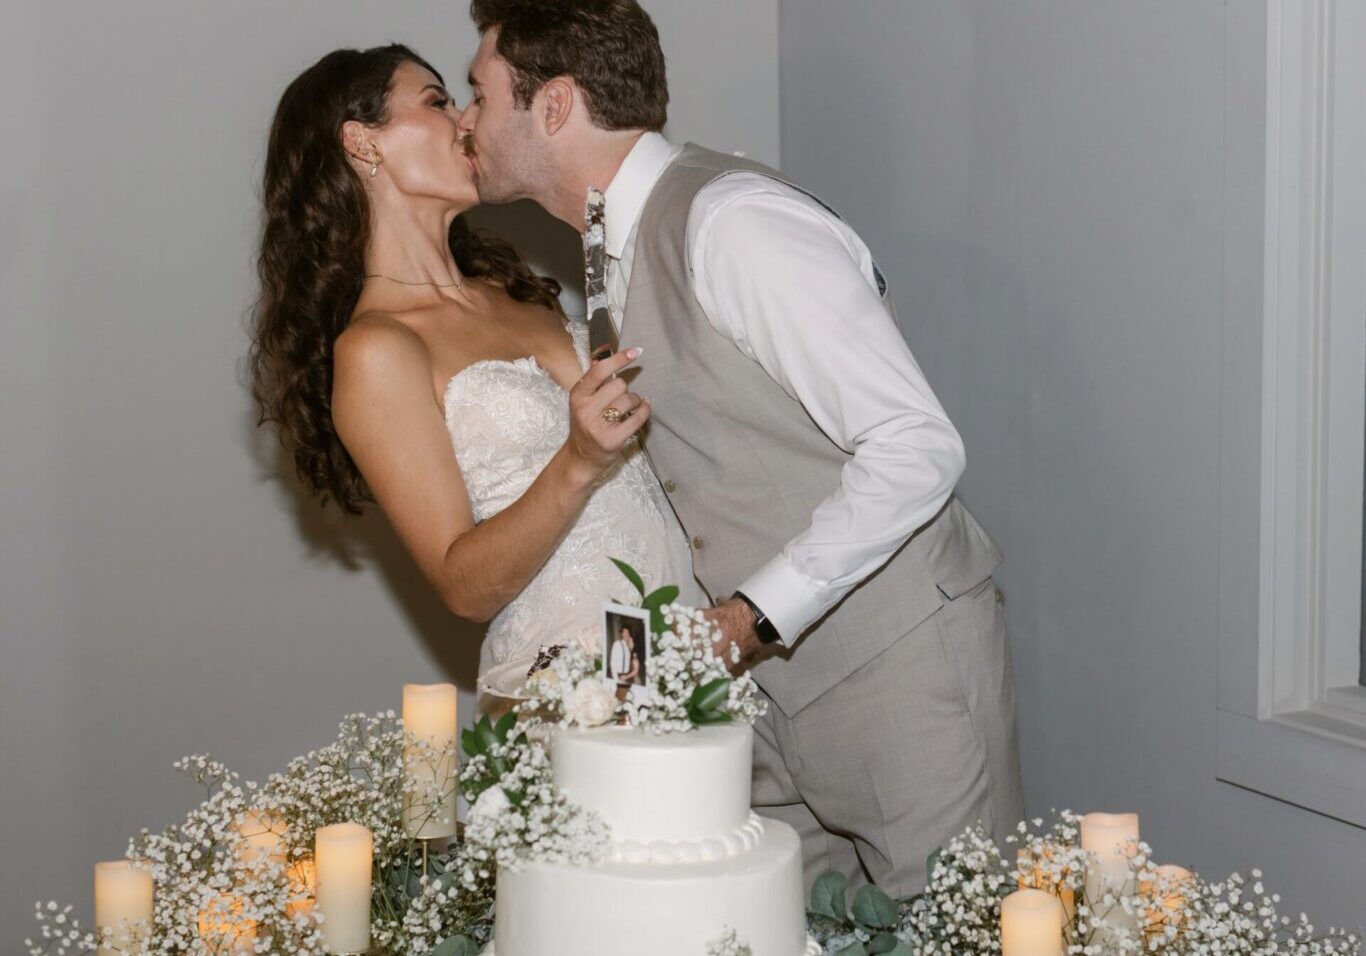 A bride and groom kissing in front of a wedding cake.